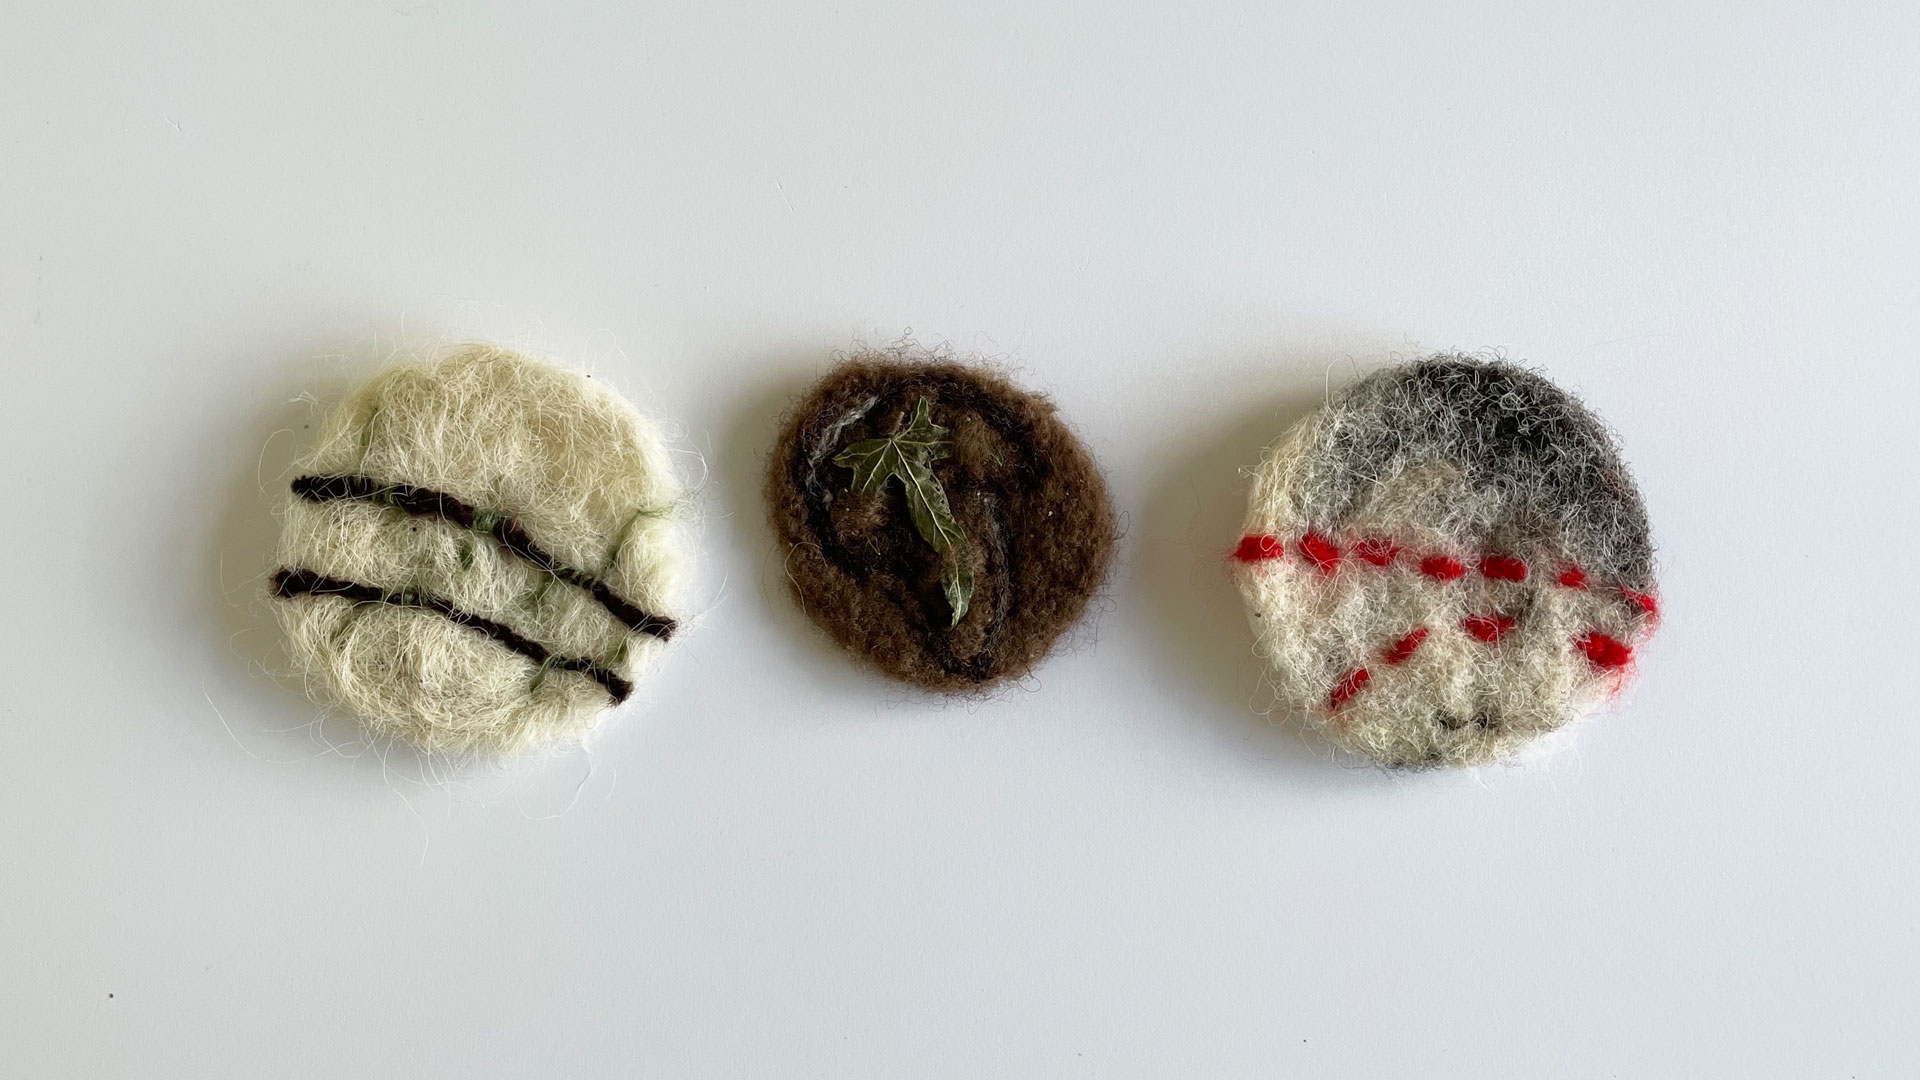 3 circular brooches made of felted wool and natural materials on a white background